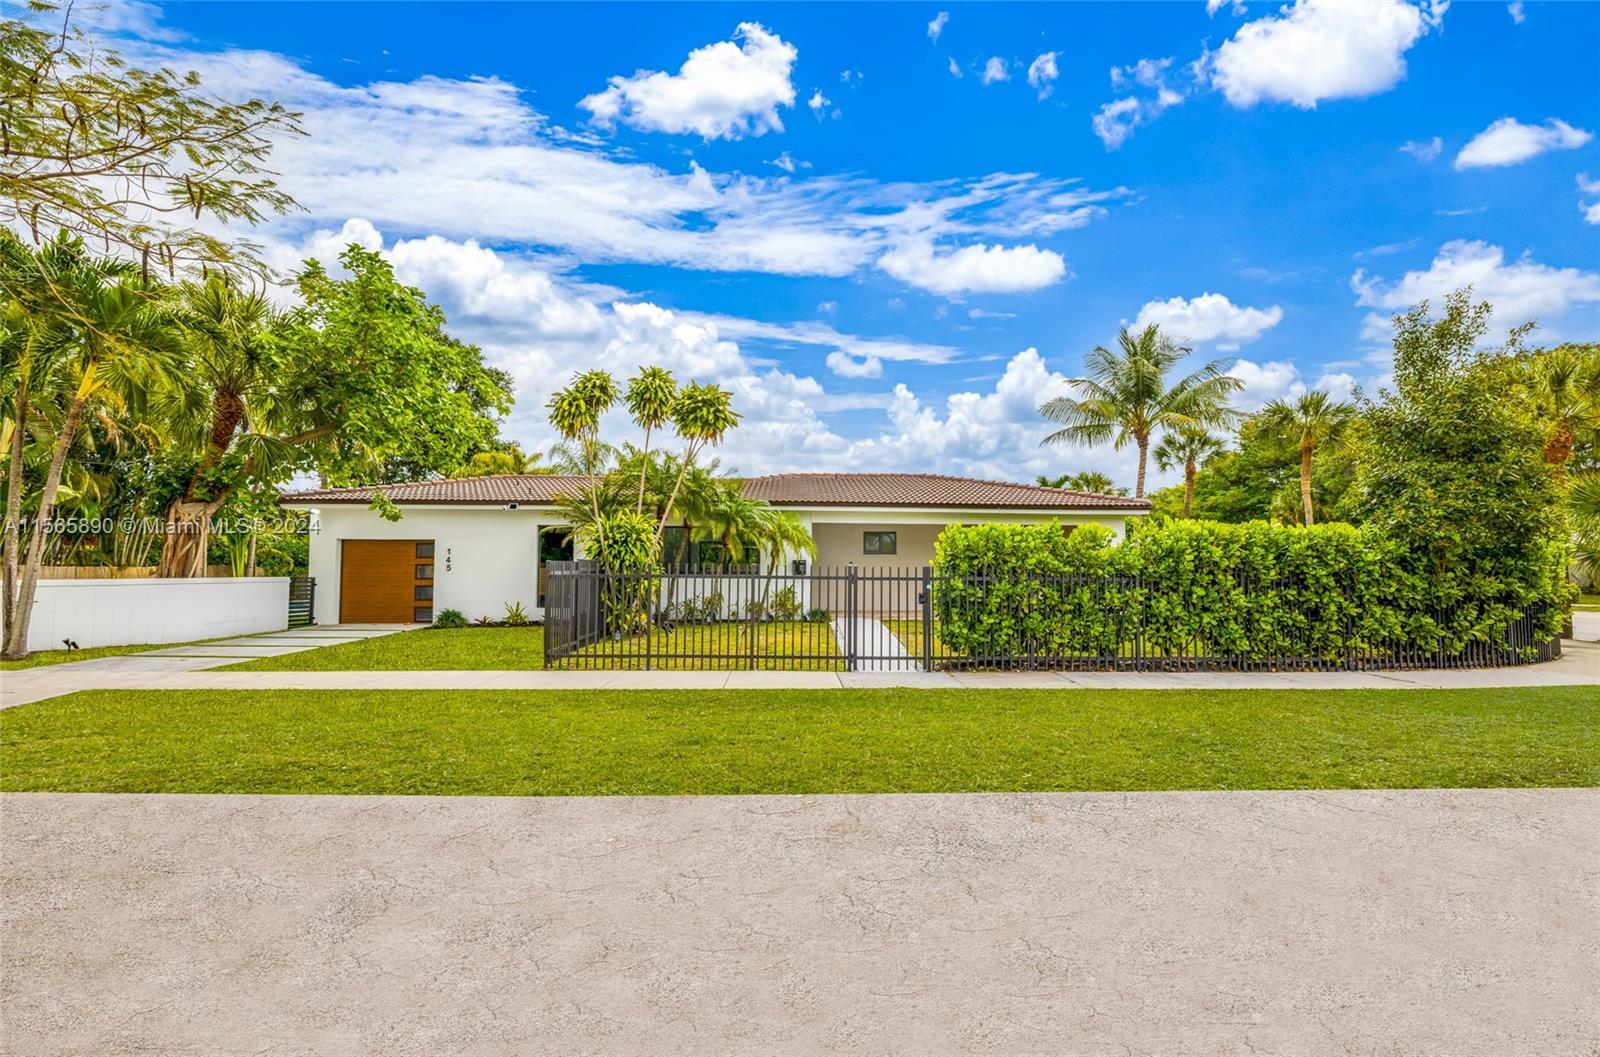 Photo of 145 NW 95th St in Miami Shores, FL